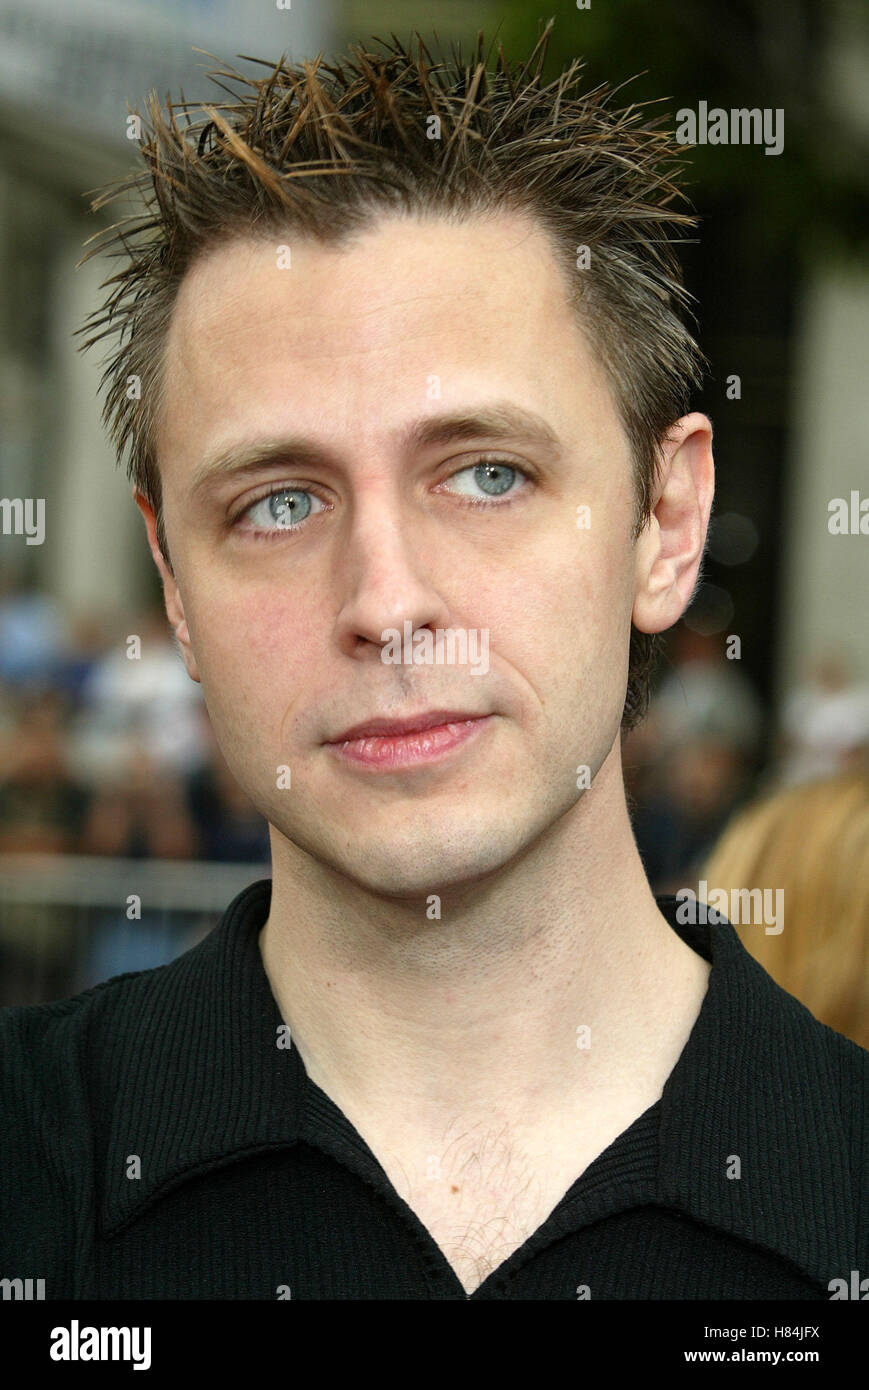 JAMES GUNN SCOOBY-DOO Welt PREMIERE GRUAMAN des CHINESE THEATRE HOLLYWOOD LOS ANGELES USA 8. Juni 2002 Stockfoto